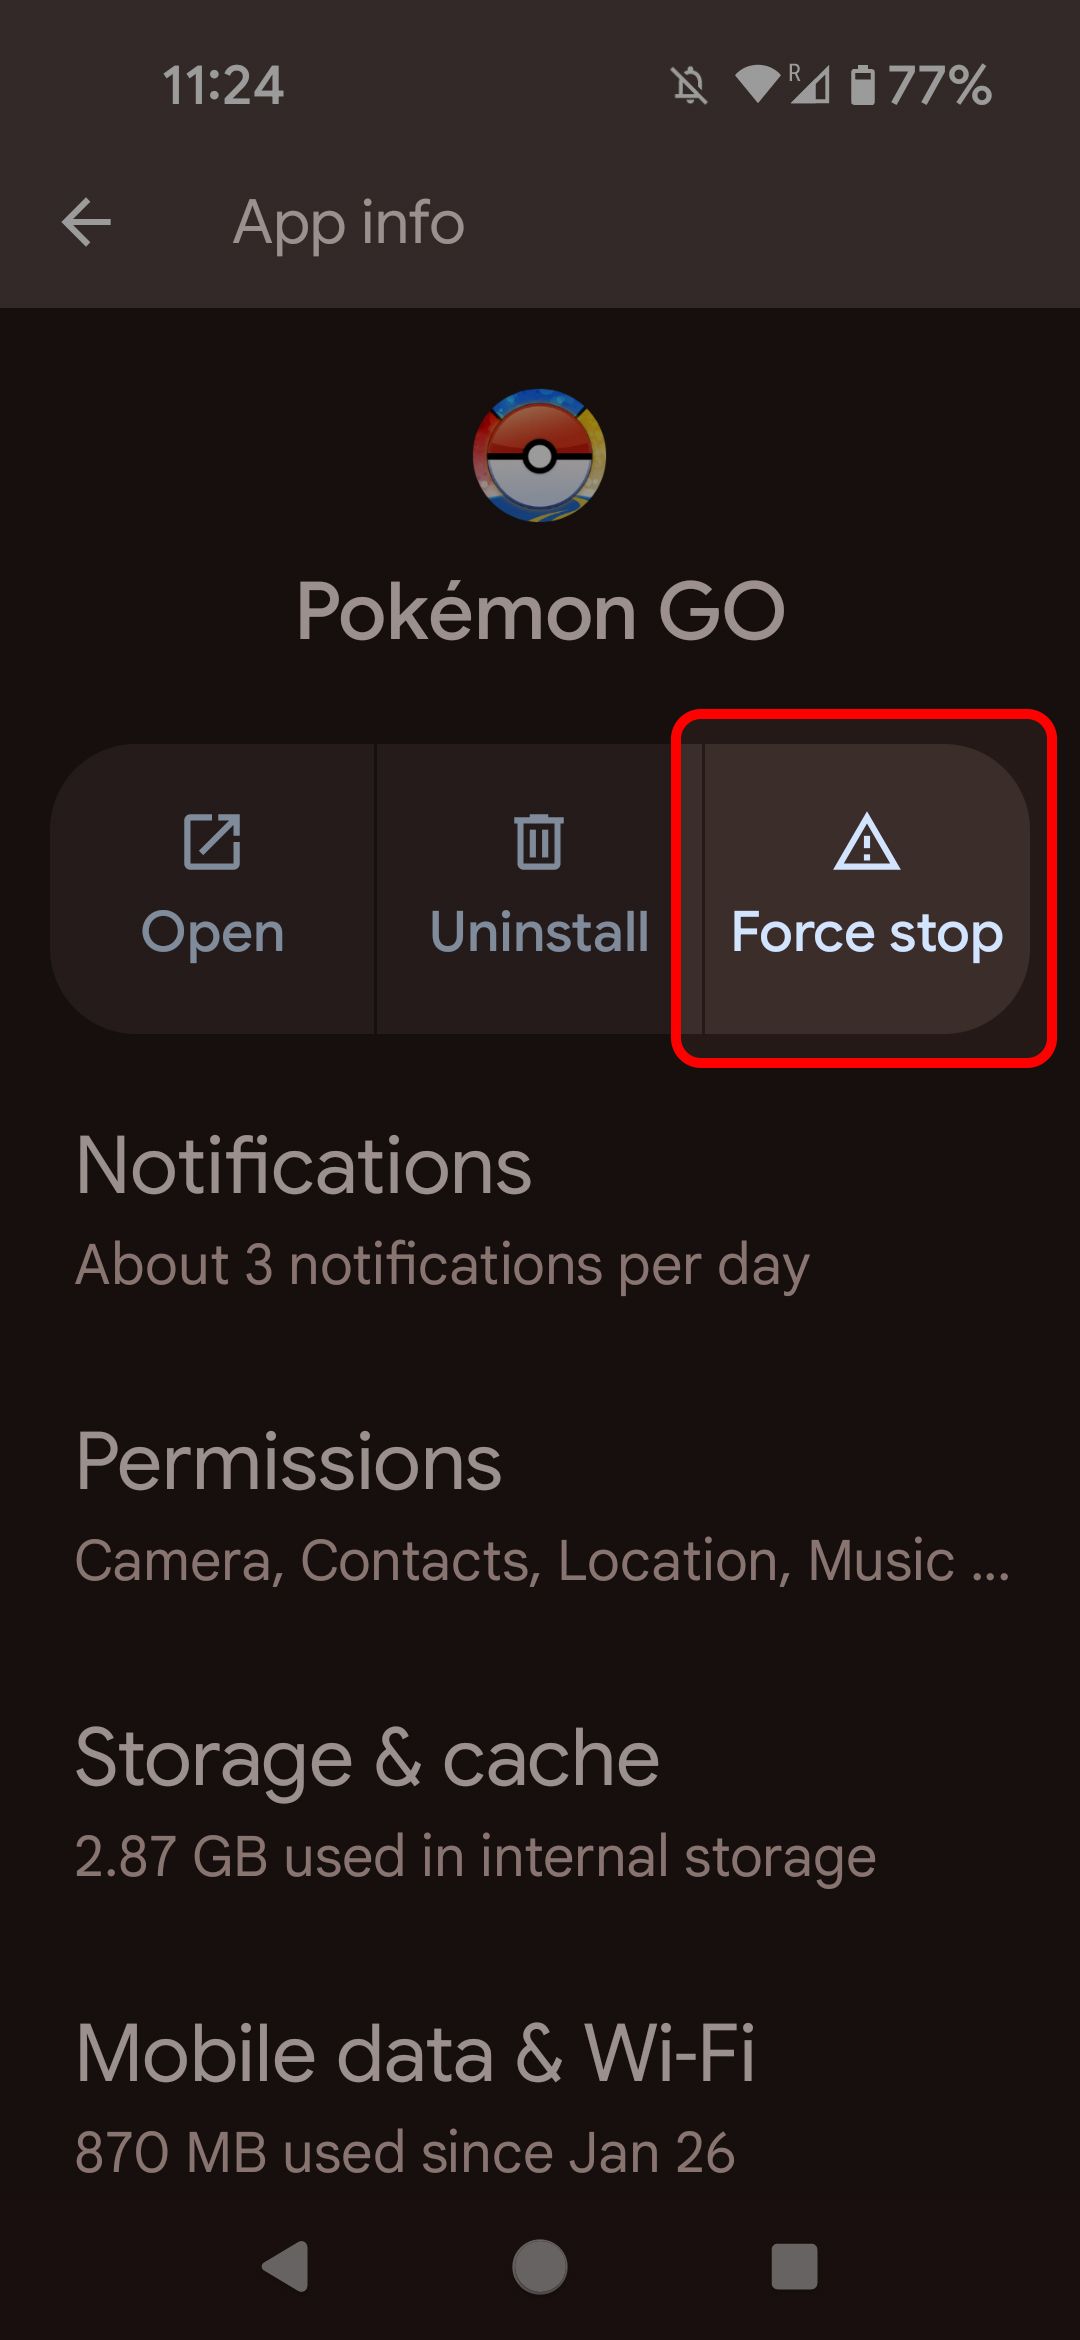 Android app info menu highlighting Force stop option